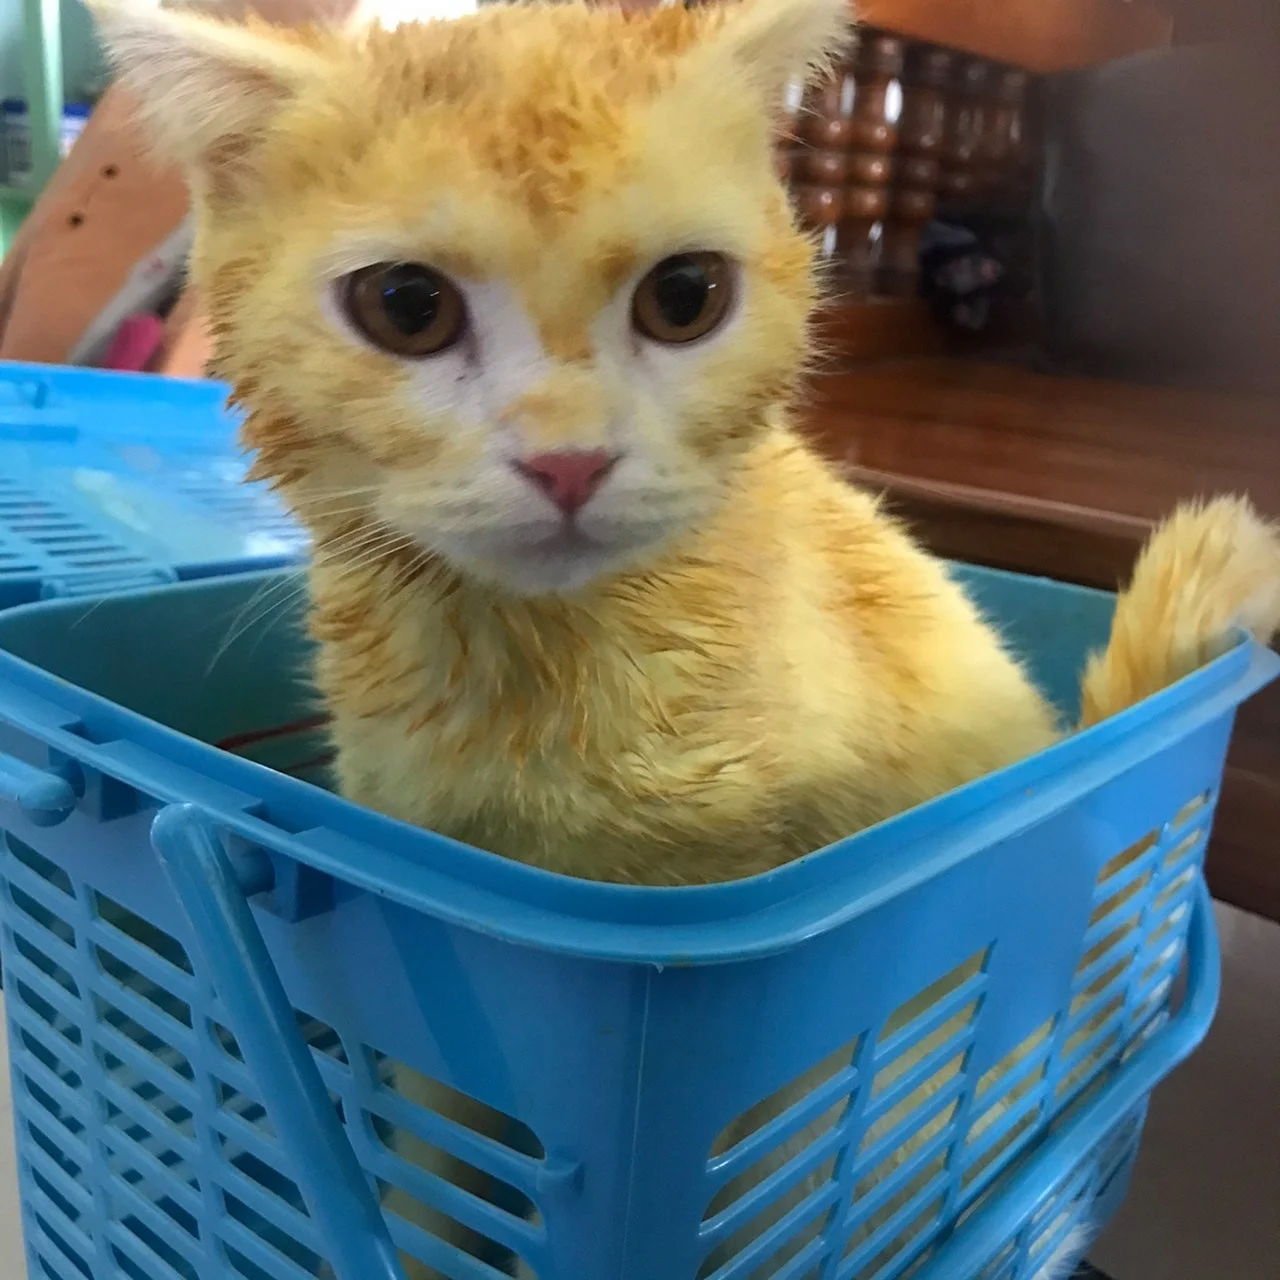 Thai Lady Turned Her Cat Yellow Trying To Save Its Life